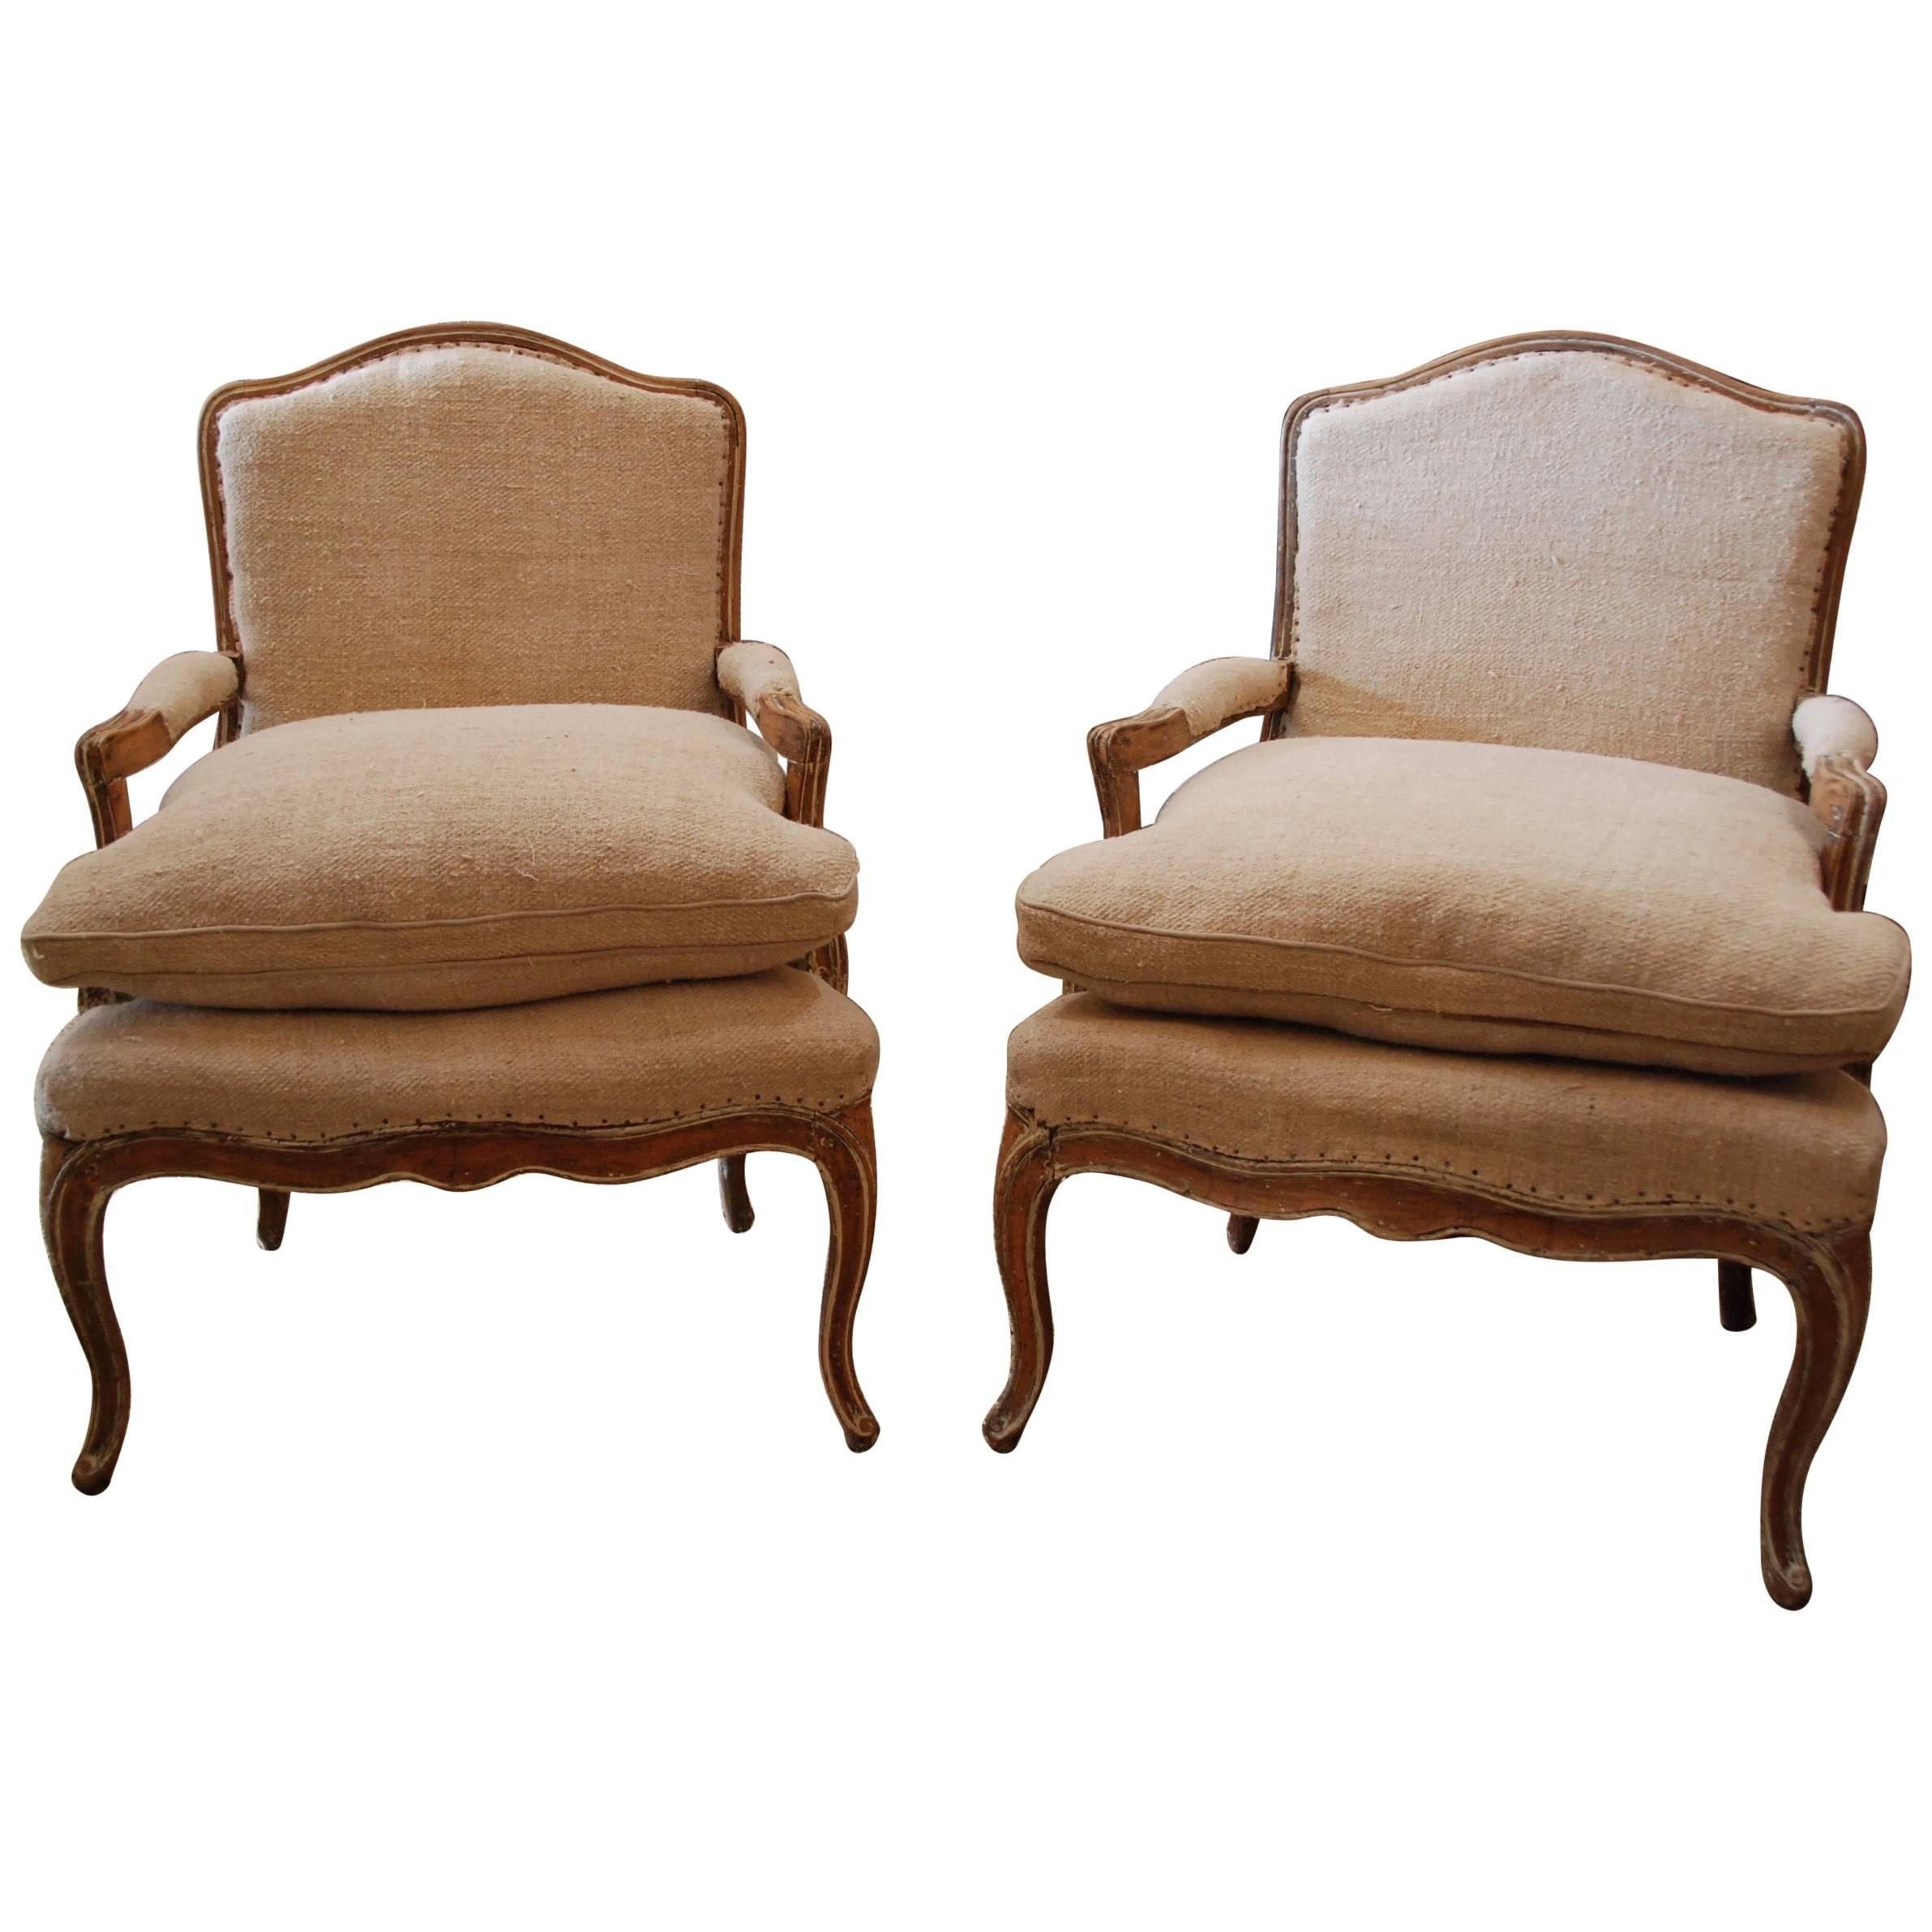 Pair of 19th Century French Bergère Chairs For Sale